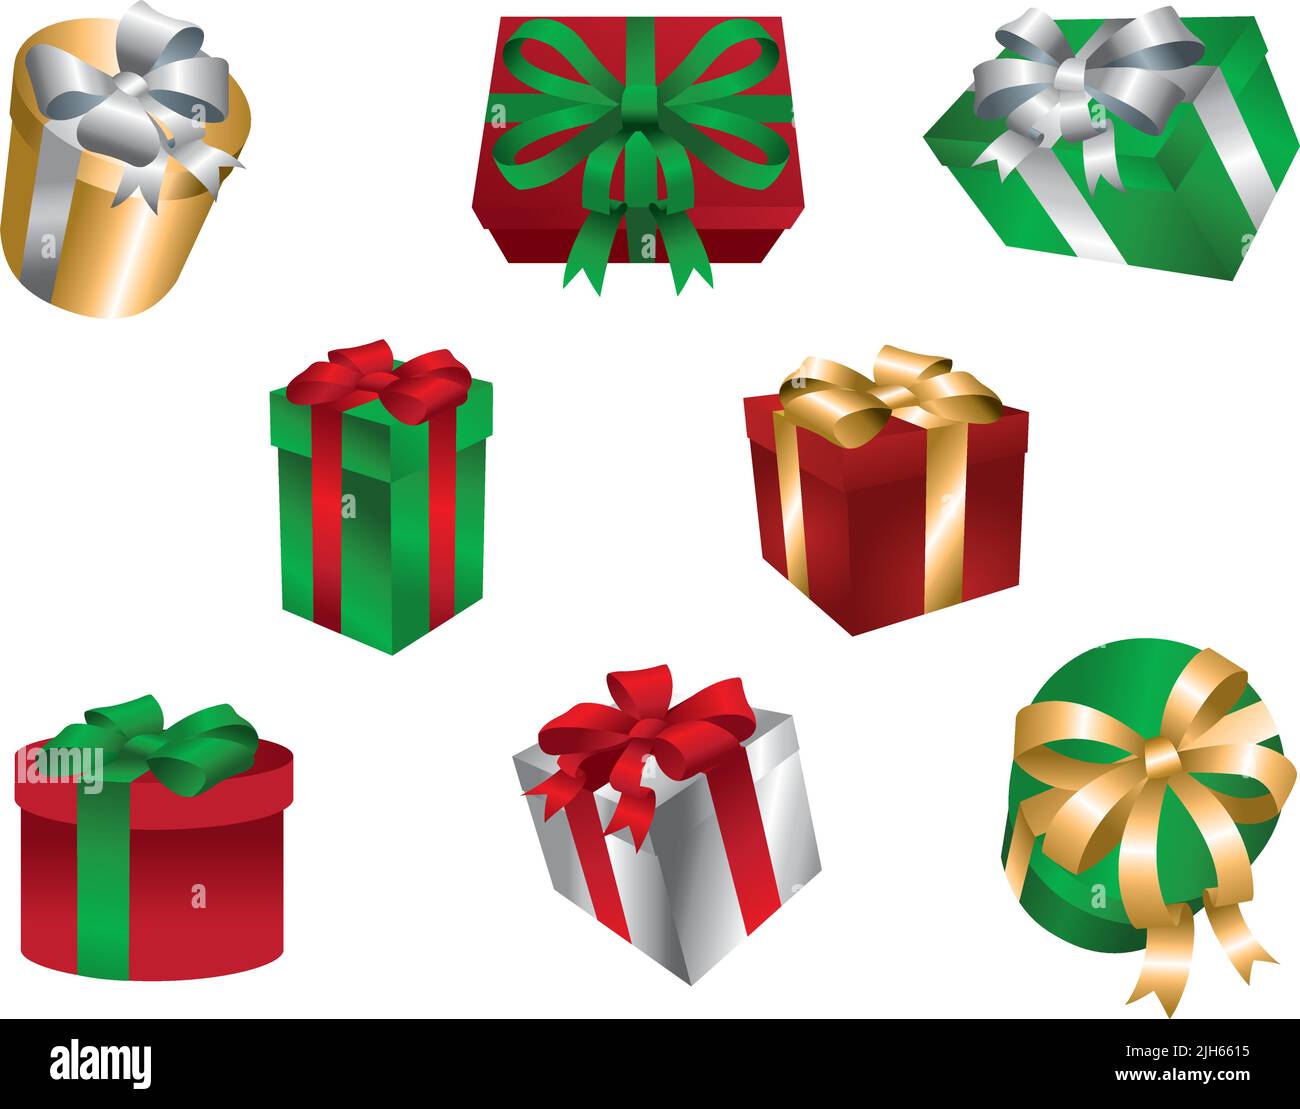 A set of vector illustrated Christmas holiday gift boxes with ribbons and bows. Stock Vector